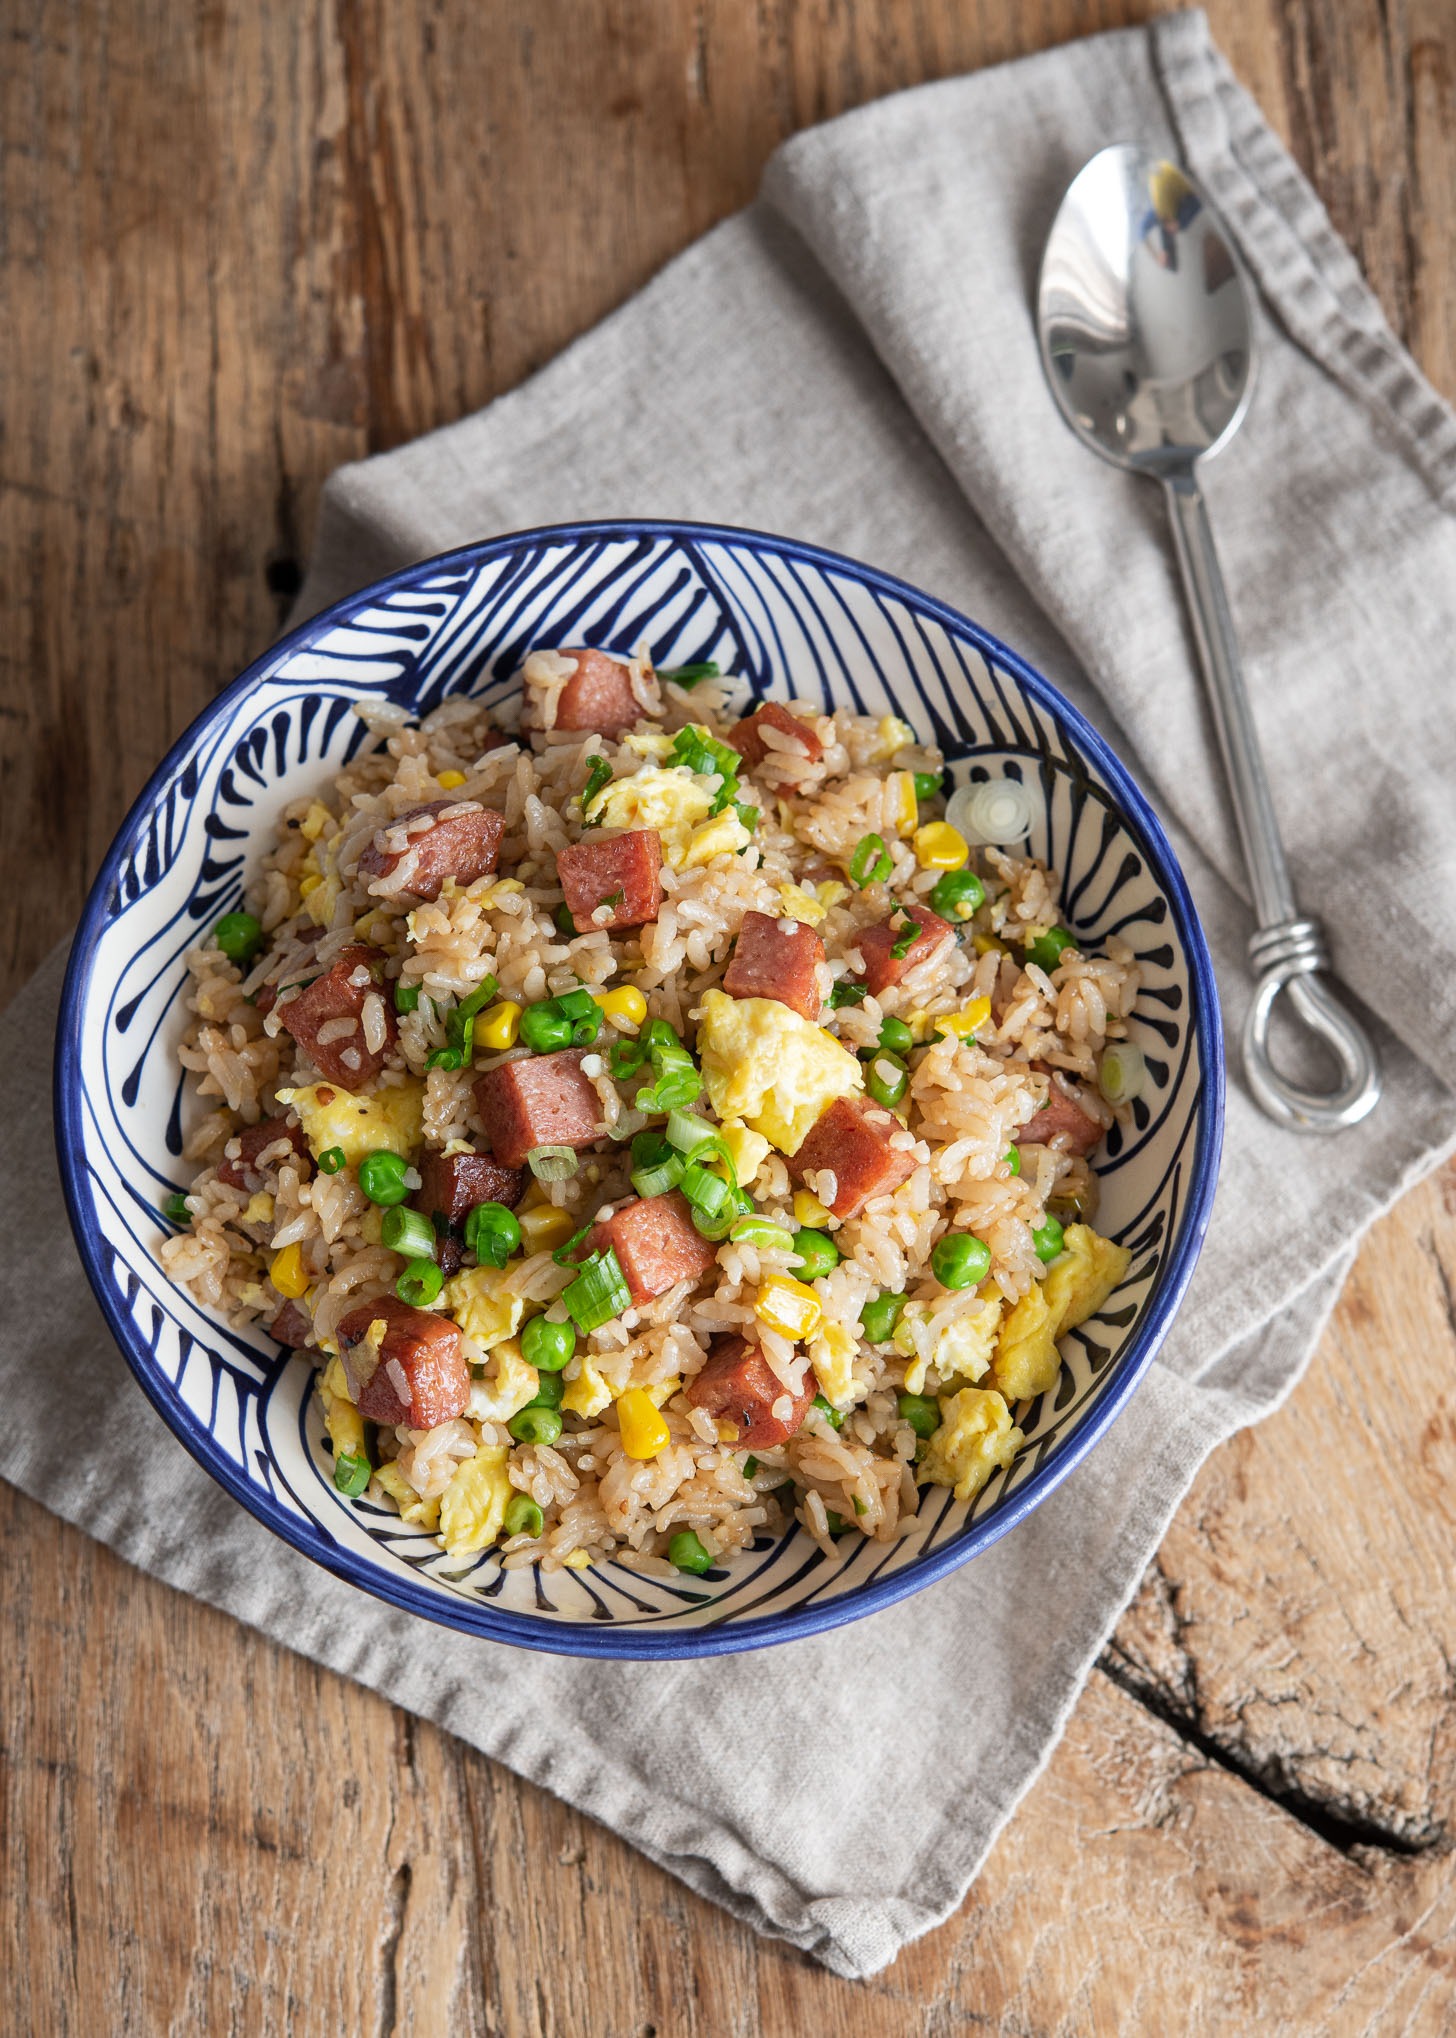 Spam fried rice is ready to serve.